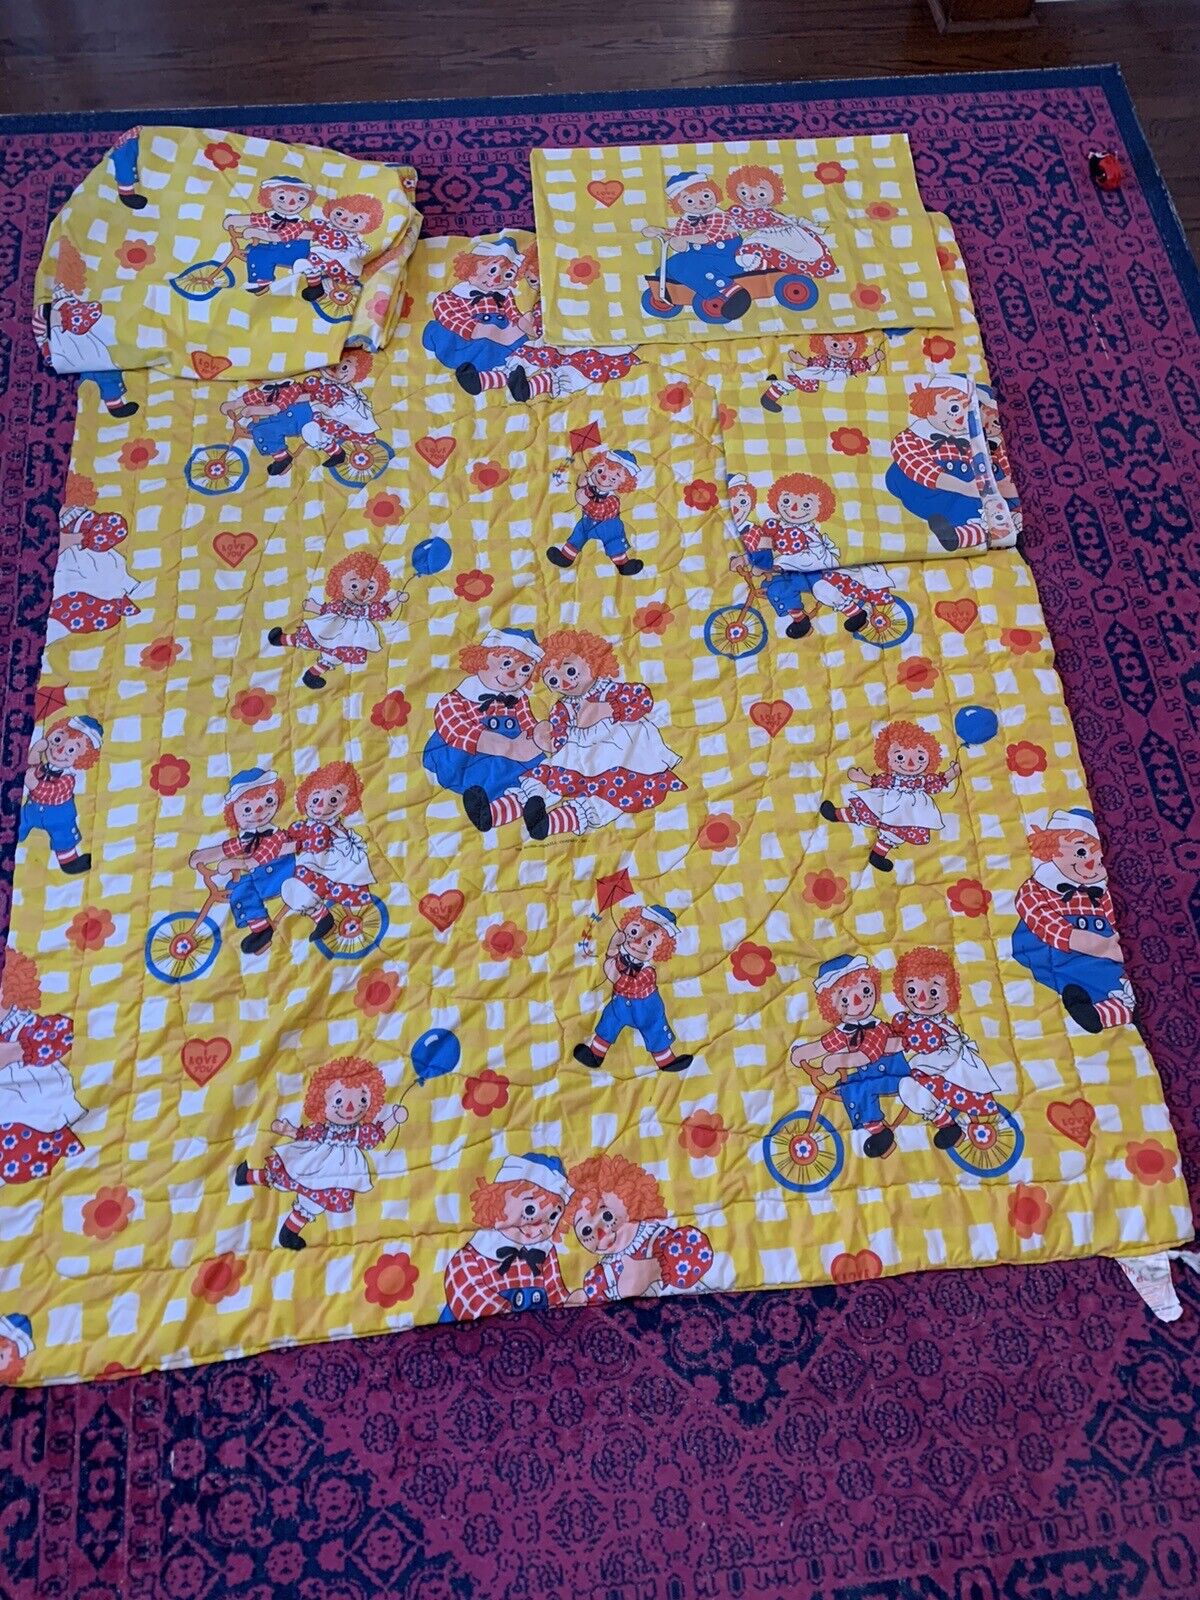 FULL SET VTG 70s BOBBS - MERRILL COM RAGGEDY ANN AND ANDY TWIN SIZE BEDDING